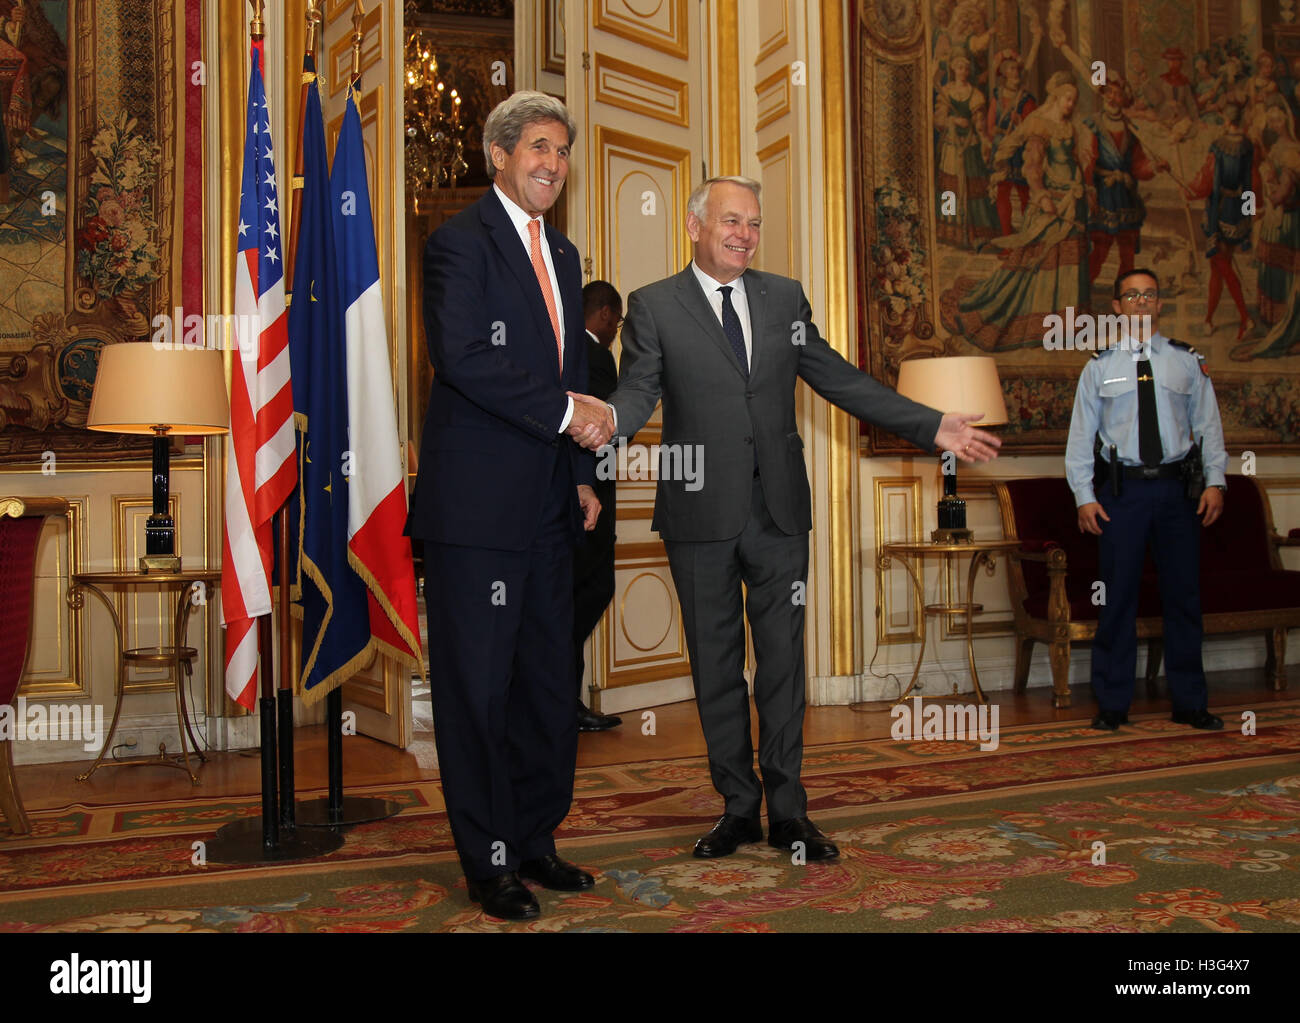 U.S. Secretary of State John Kerry shakes hands with French Foreign Minister Jean-Marc Ayrault at the French Ministry of Foreign Affairs in Paris, France on July 30, 2016. Stock Photo